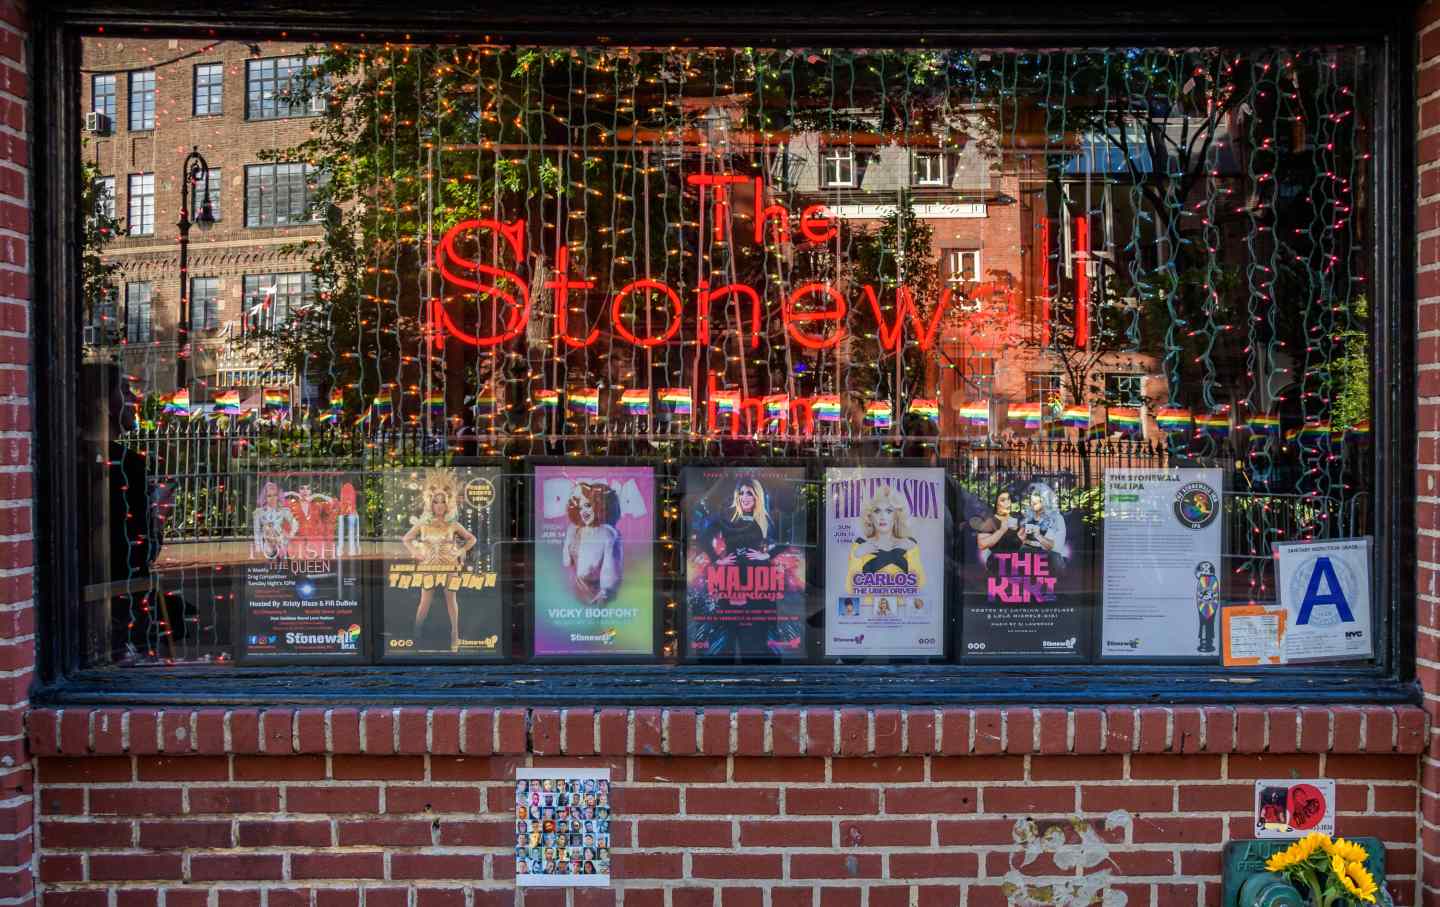 The front window of The Stonewall Inn